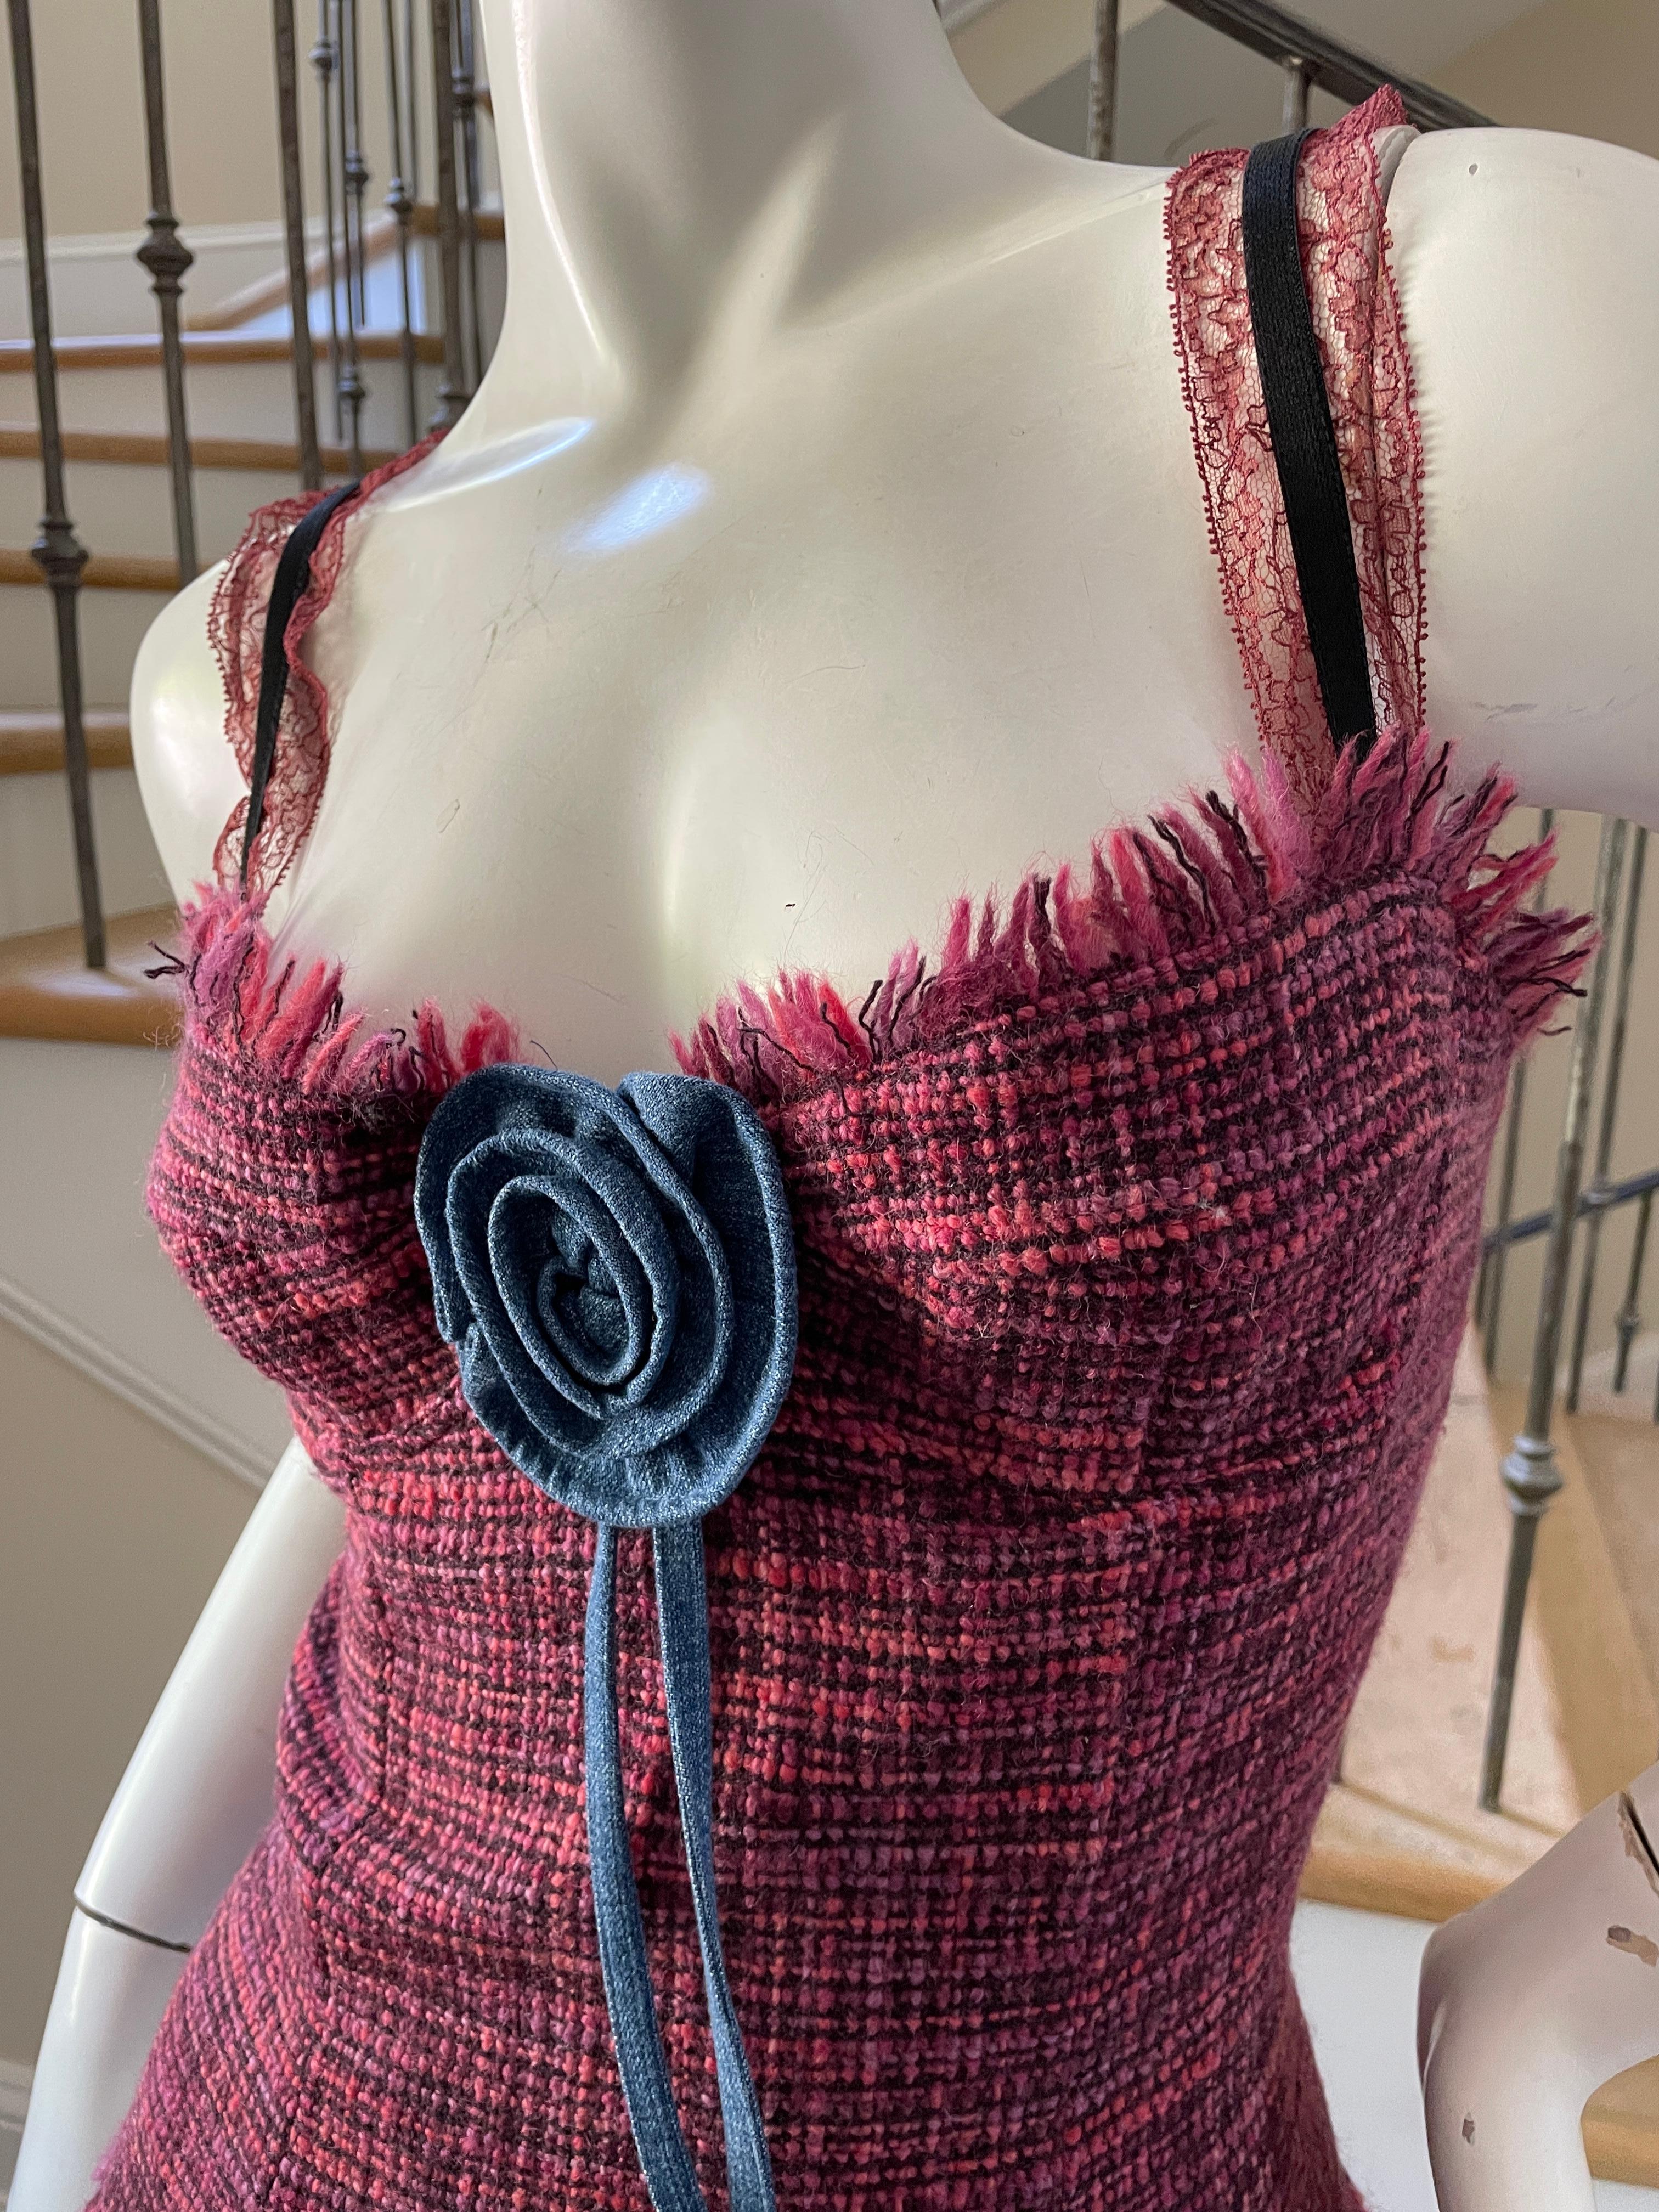 Dolce & Gabbana for D&G Fringed Tweed Corset Top with Denim Trim In Excellent Condition For Sale In Cloverdale, CA